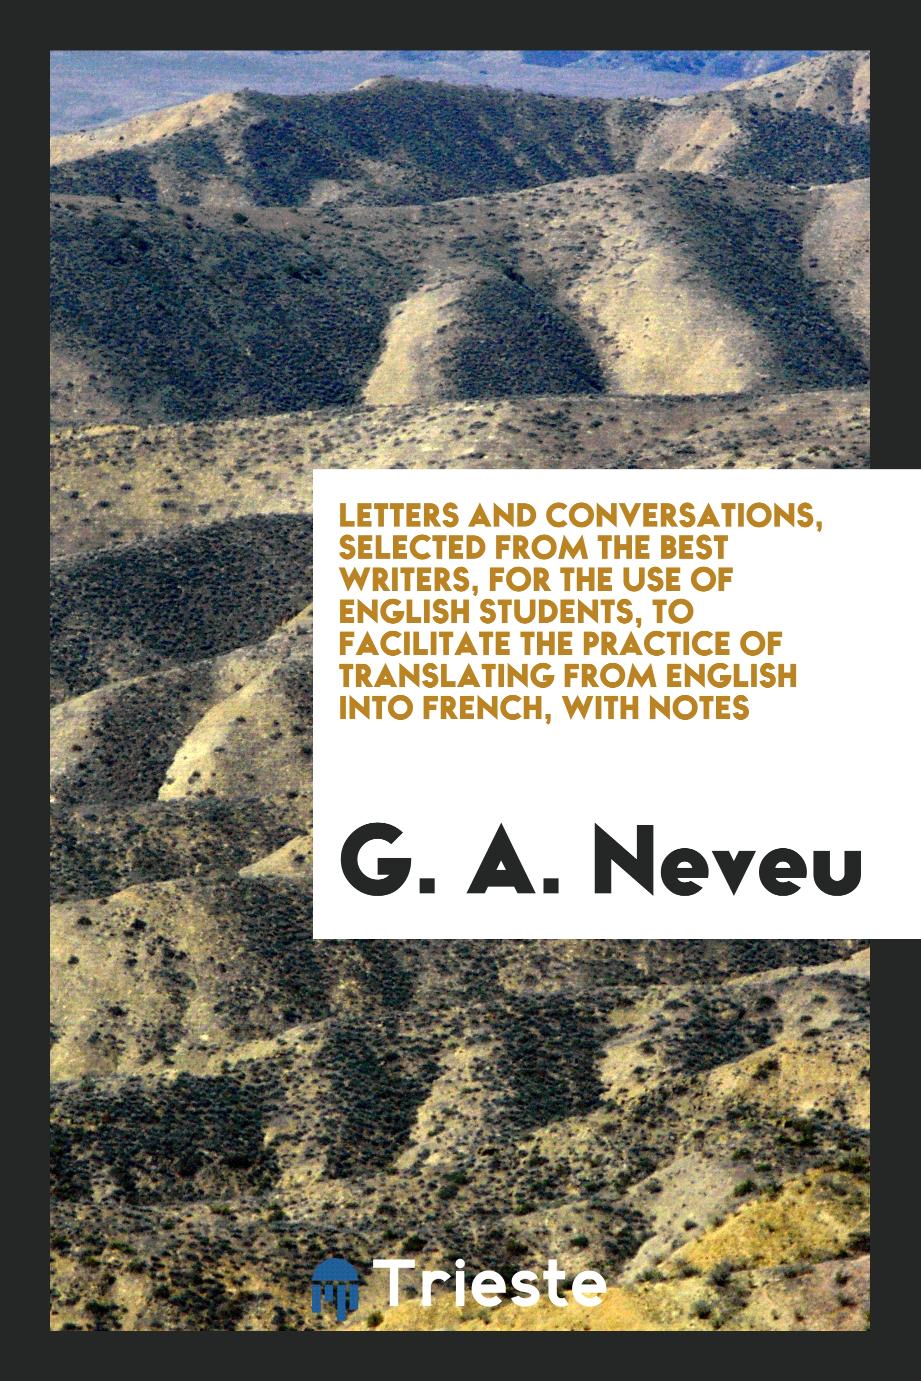 Letters and Conversations, Selected from the Best Writers, for the Use of English Students, to Facilitate the Practice of Translating from English into French, with Notes